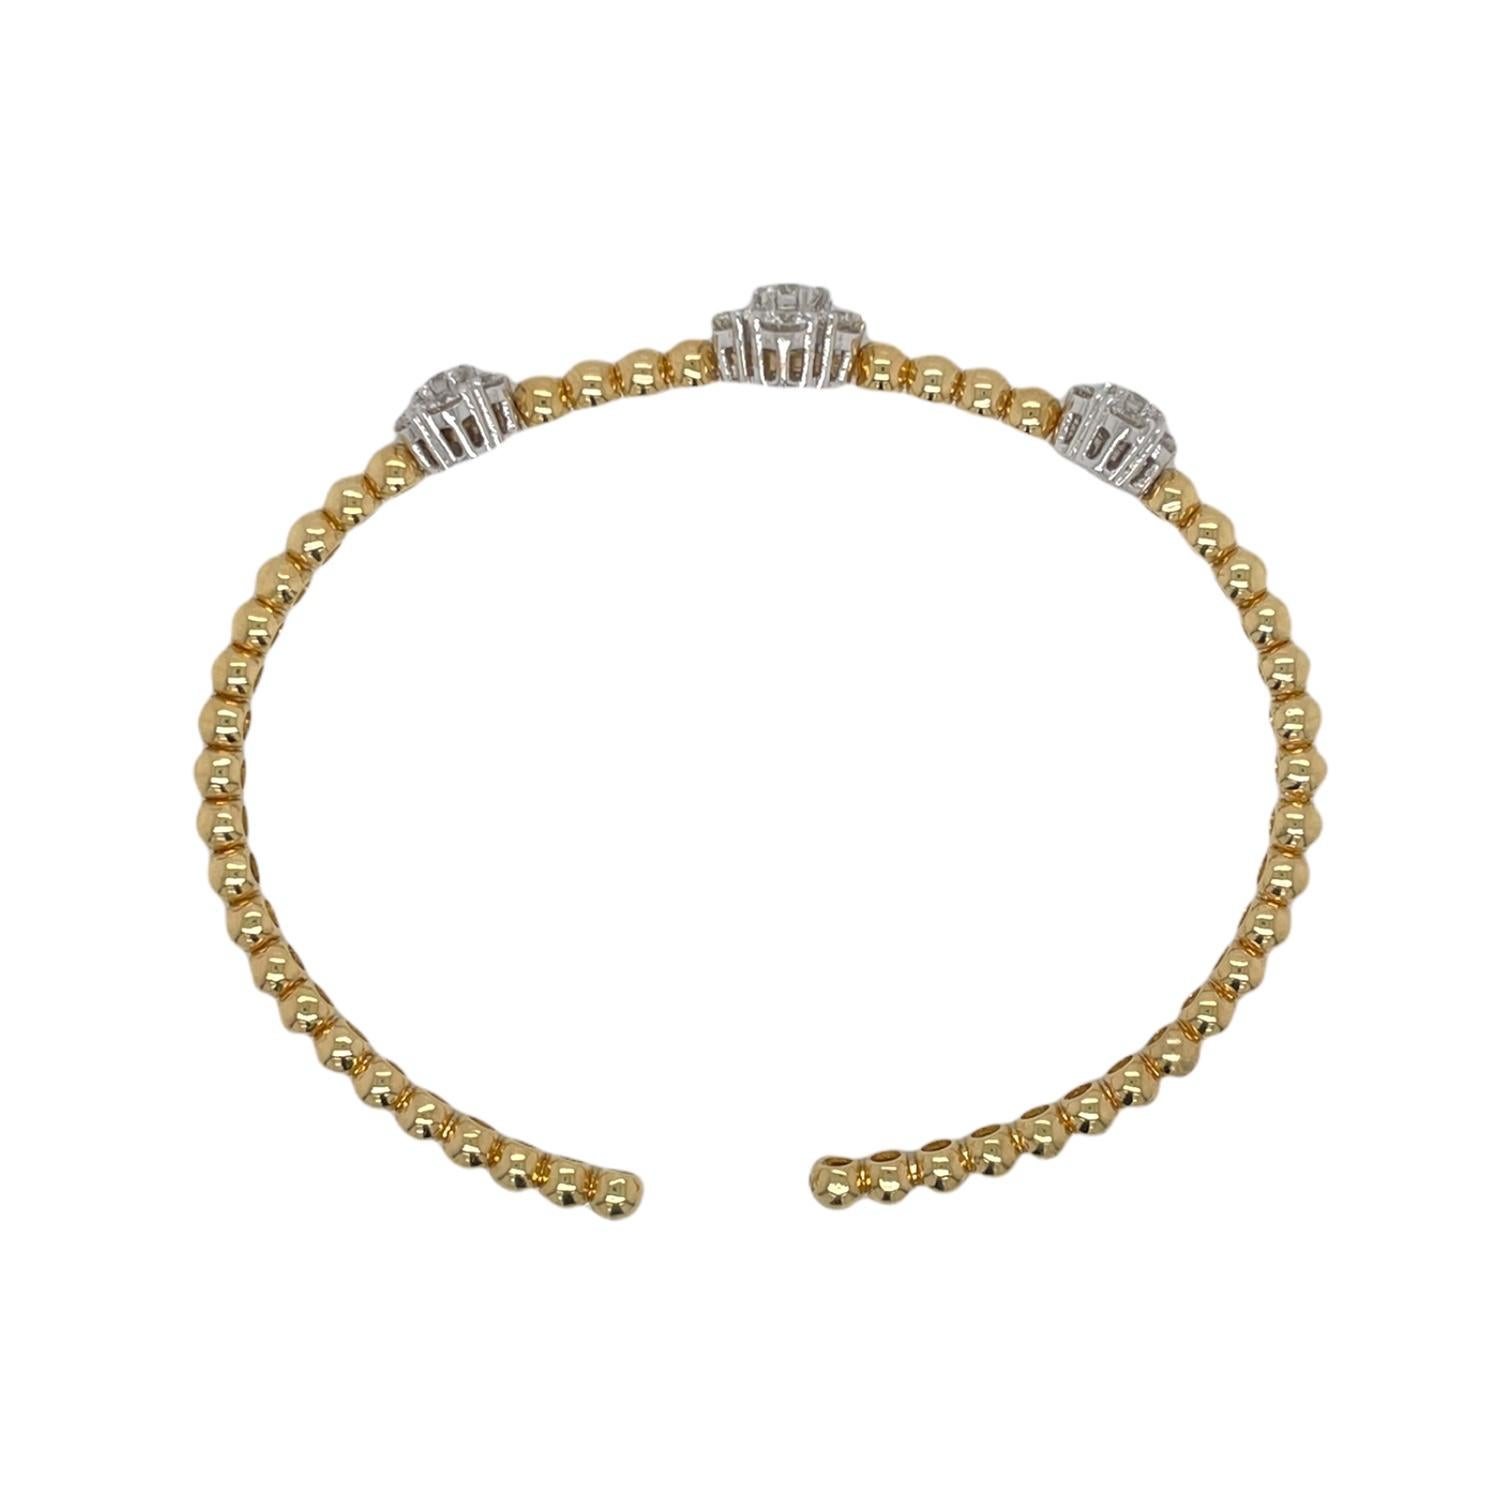 One ladies floral diamond cluster flexible bangle bracelet in 18k yellow and white gold. Bracelet contains 3 floral diamond clusters totaling 21 round brilliant diamonds, 1.88tcw. Diamonds are near colorless and SI1 in clarity. All stones are